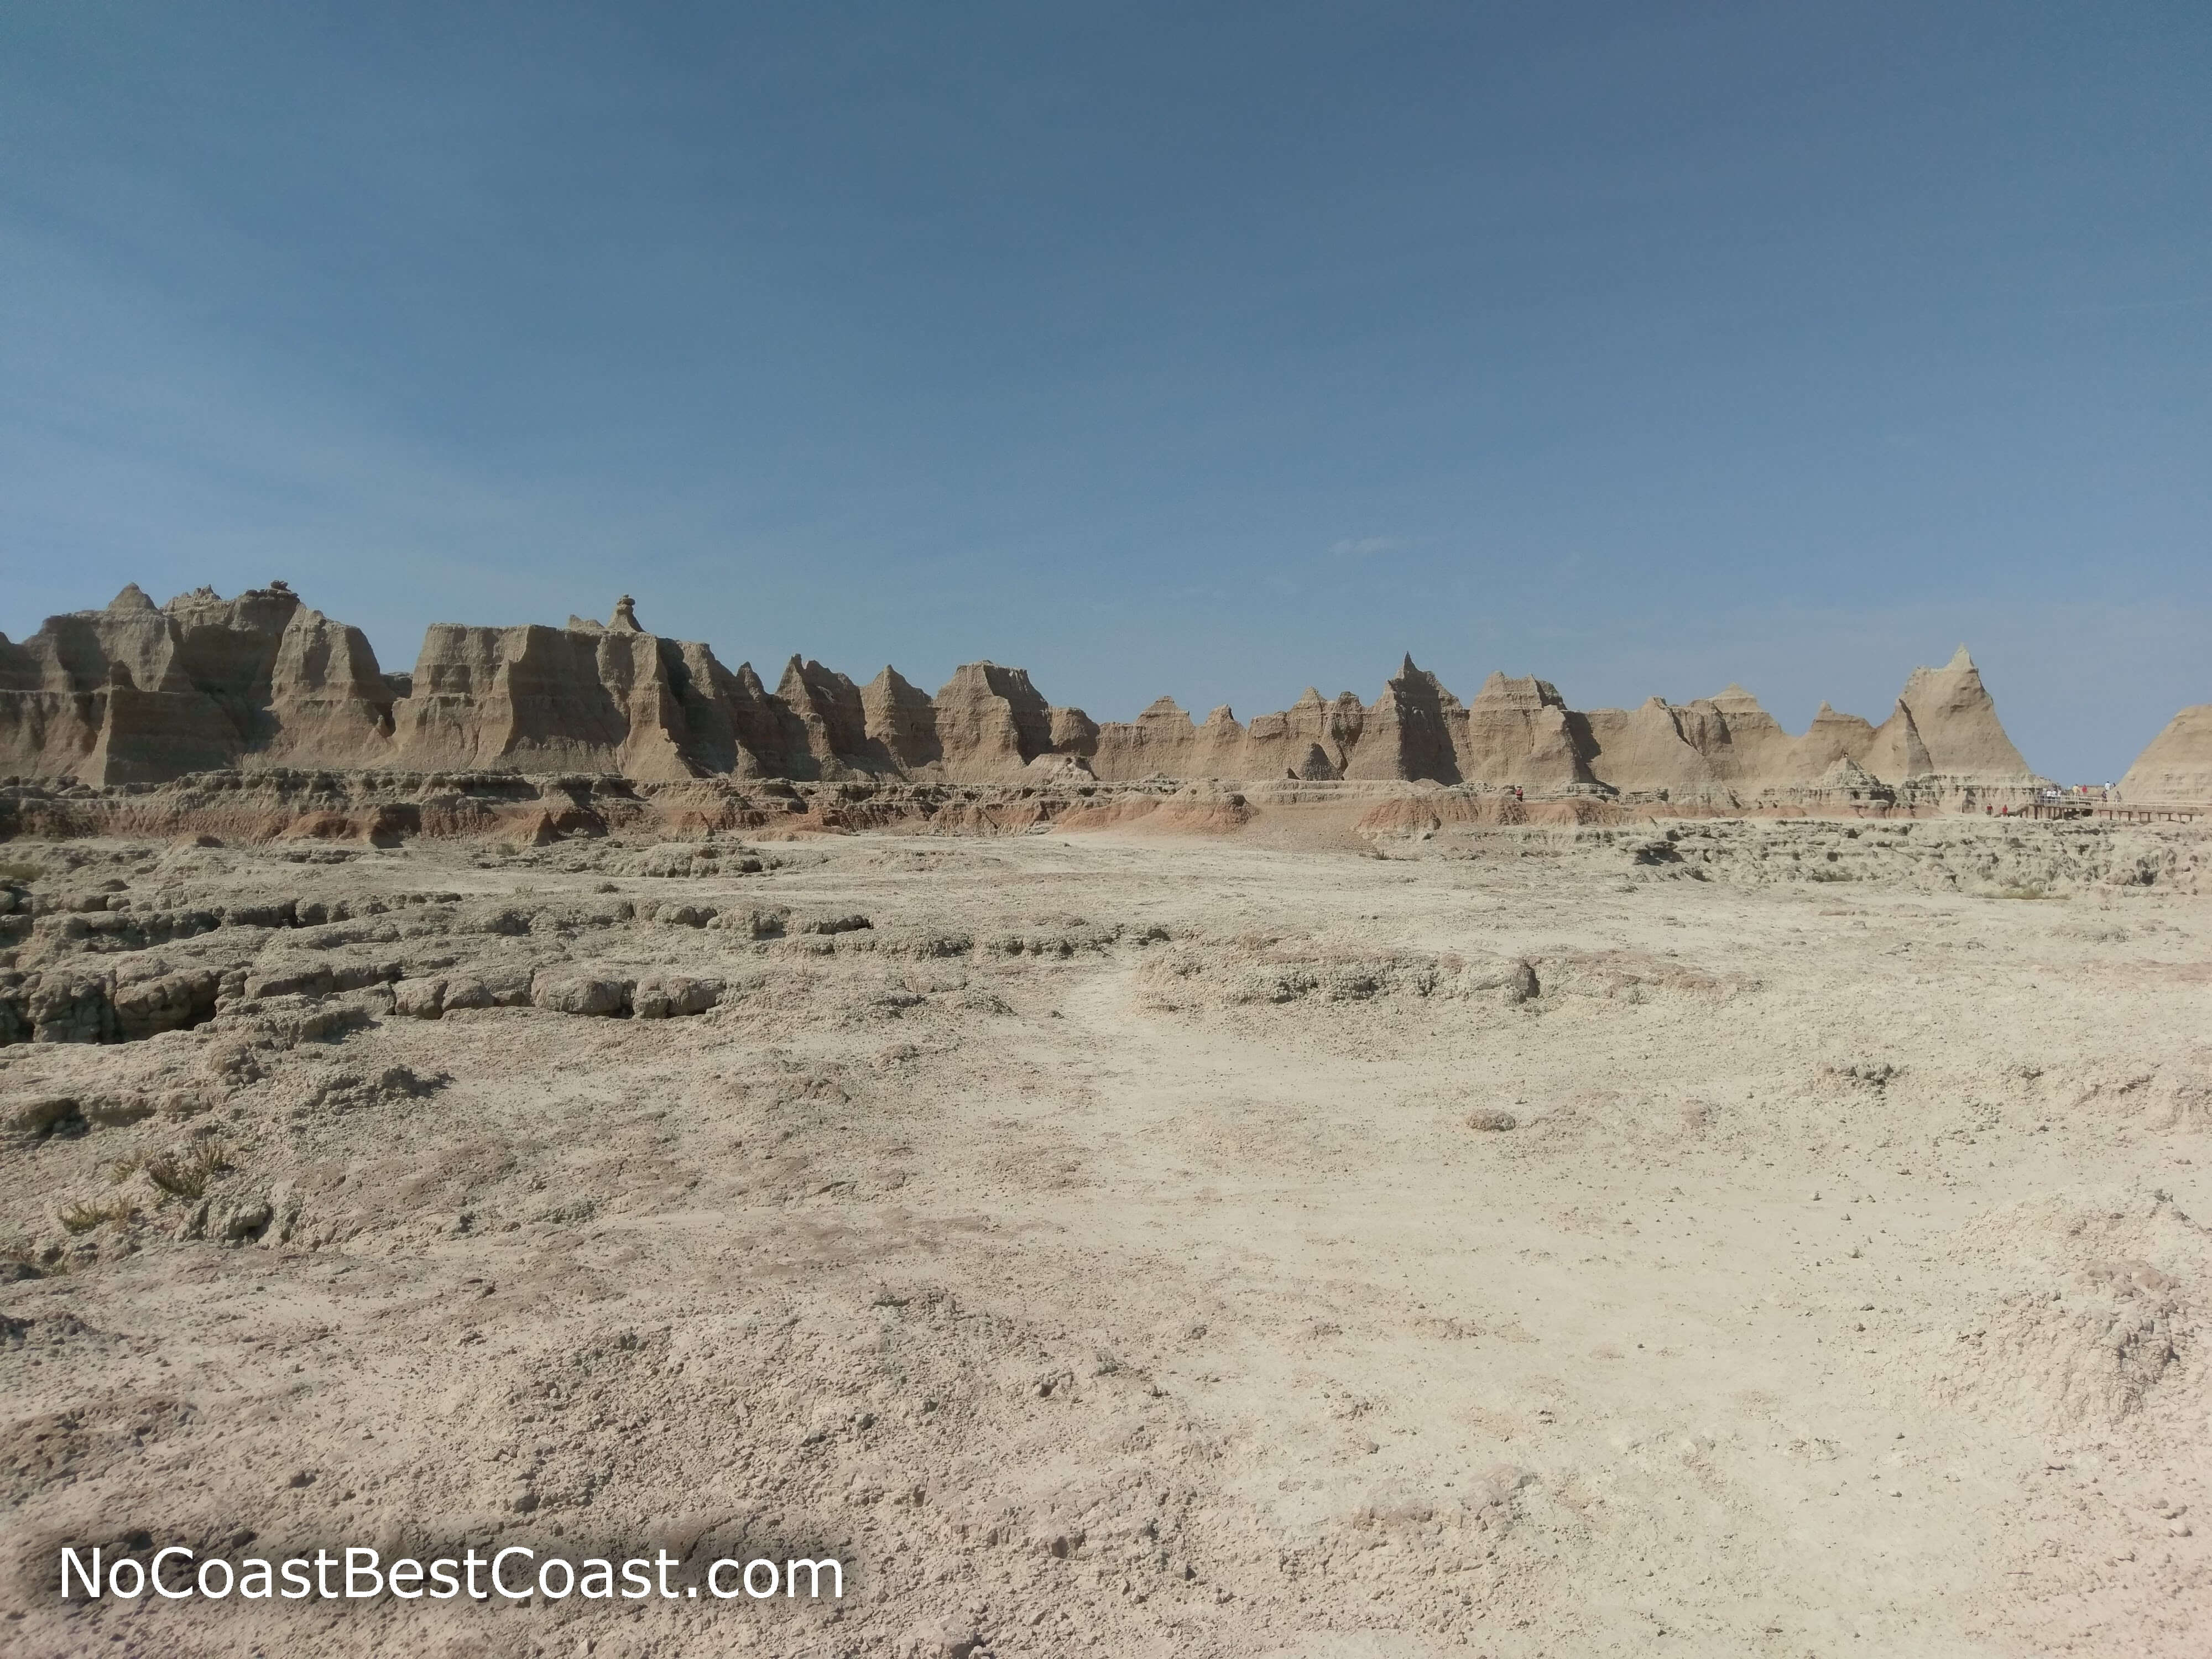 Looking back at the fortress-like wall of badlands formation